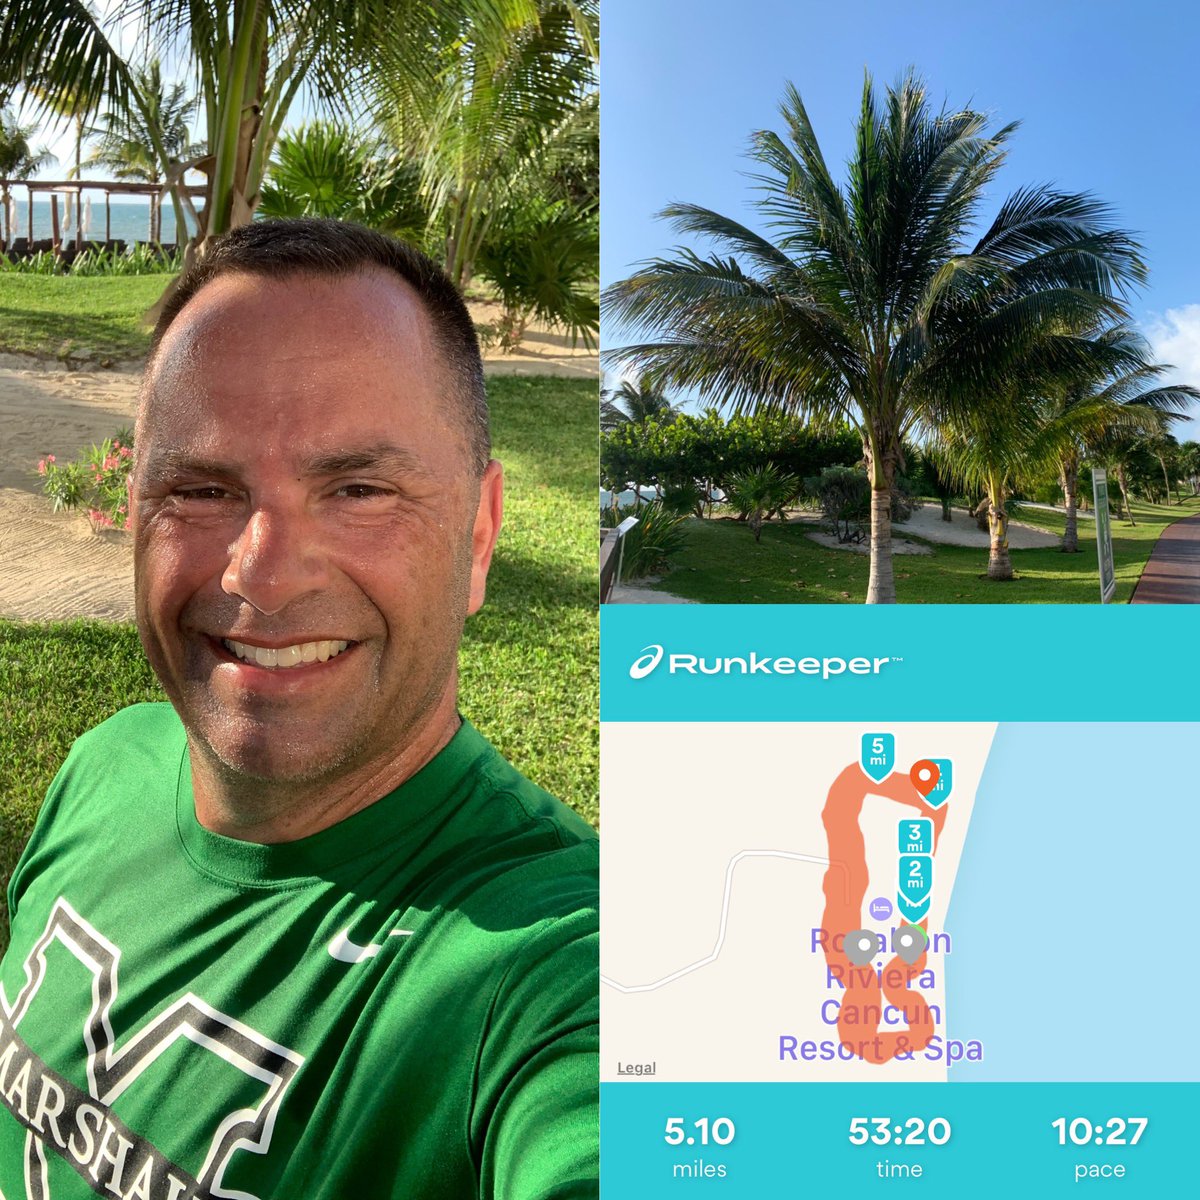 This is 51! Birthday run! In honor of turning 51 today I managed to squeeze in 5.10 miles this morning before the humidity about did me in! #runnersofinstagram #runnerslife #runner #runningonvacation #cancun #royaltonrivieracancun #oceandreamstravel #dreamvacations @RoyaltonRRC